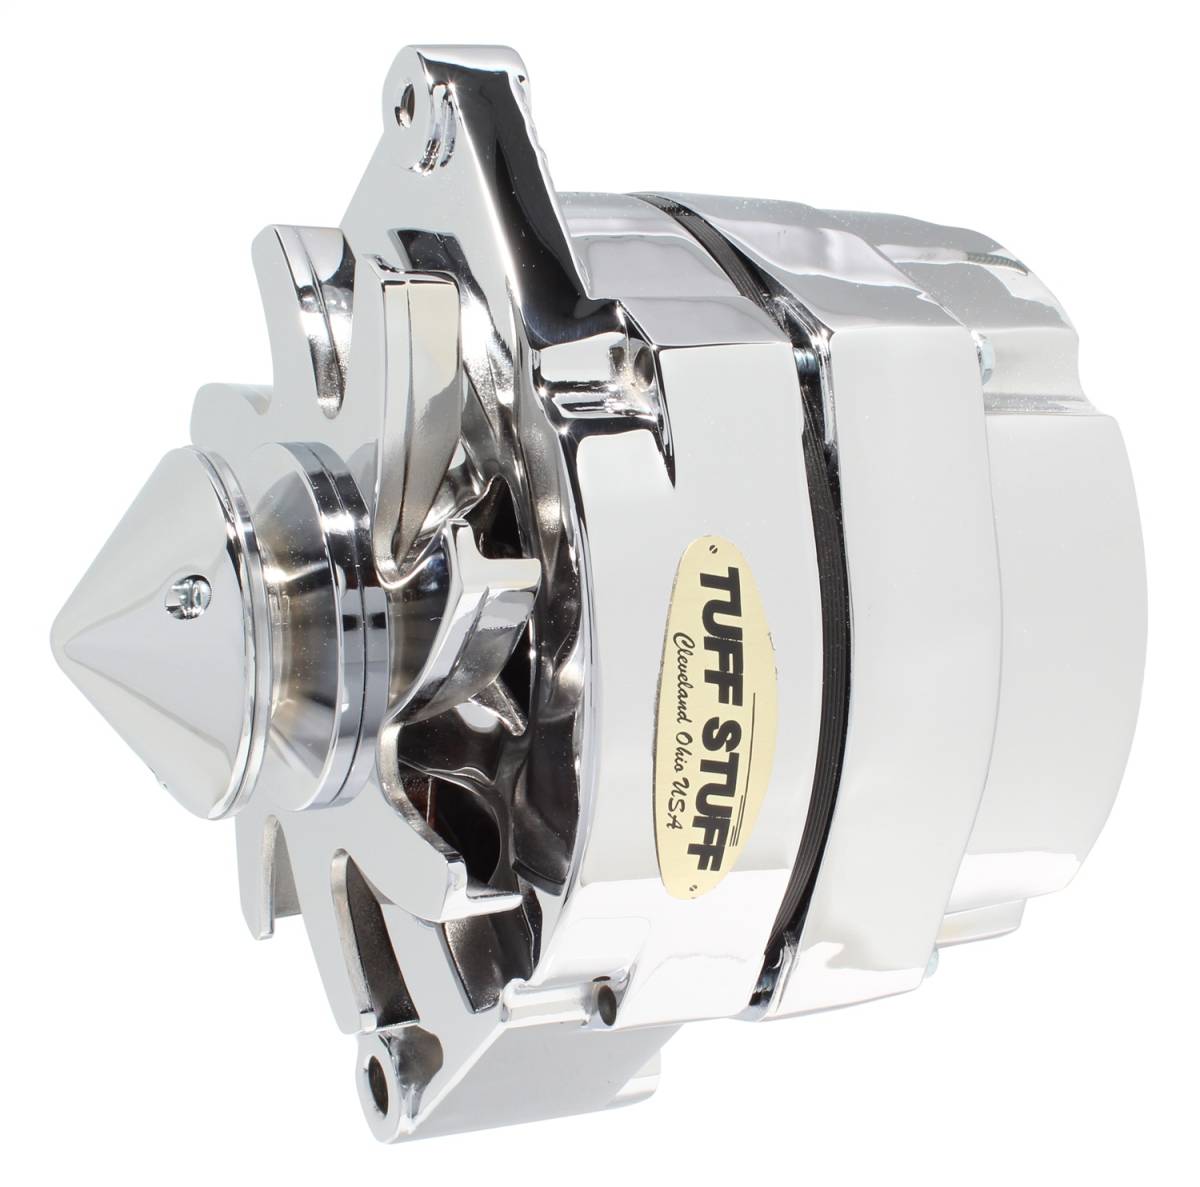 Tuff Stuff Performance - Silver Bullet Alternator 100 AMP OEM Or 1 Wire V Groove Pulley 4.85 in. Case Depth Lower Mount Boss 2 in. Long Polished 7139BBULL